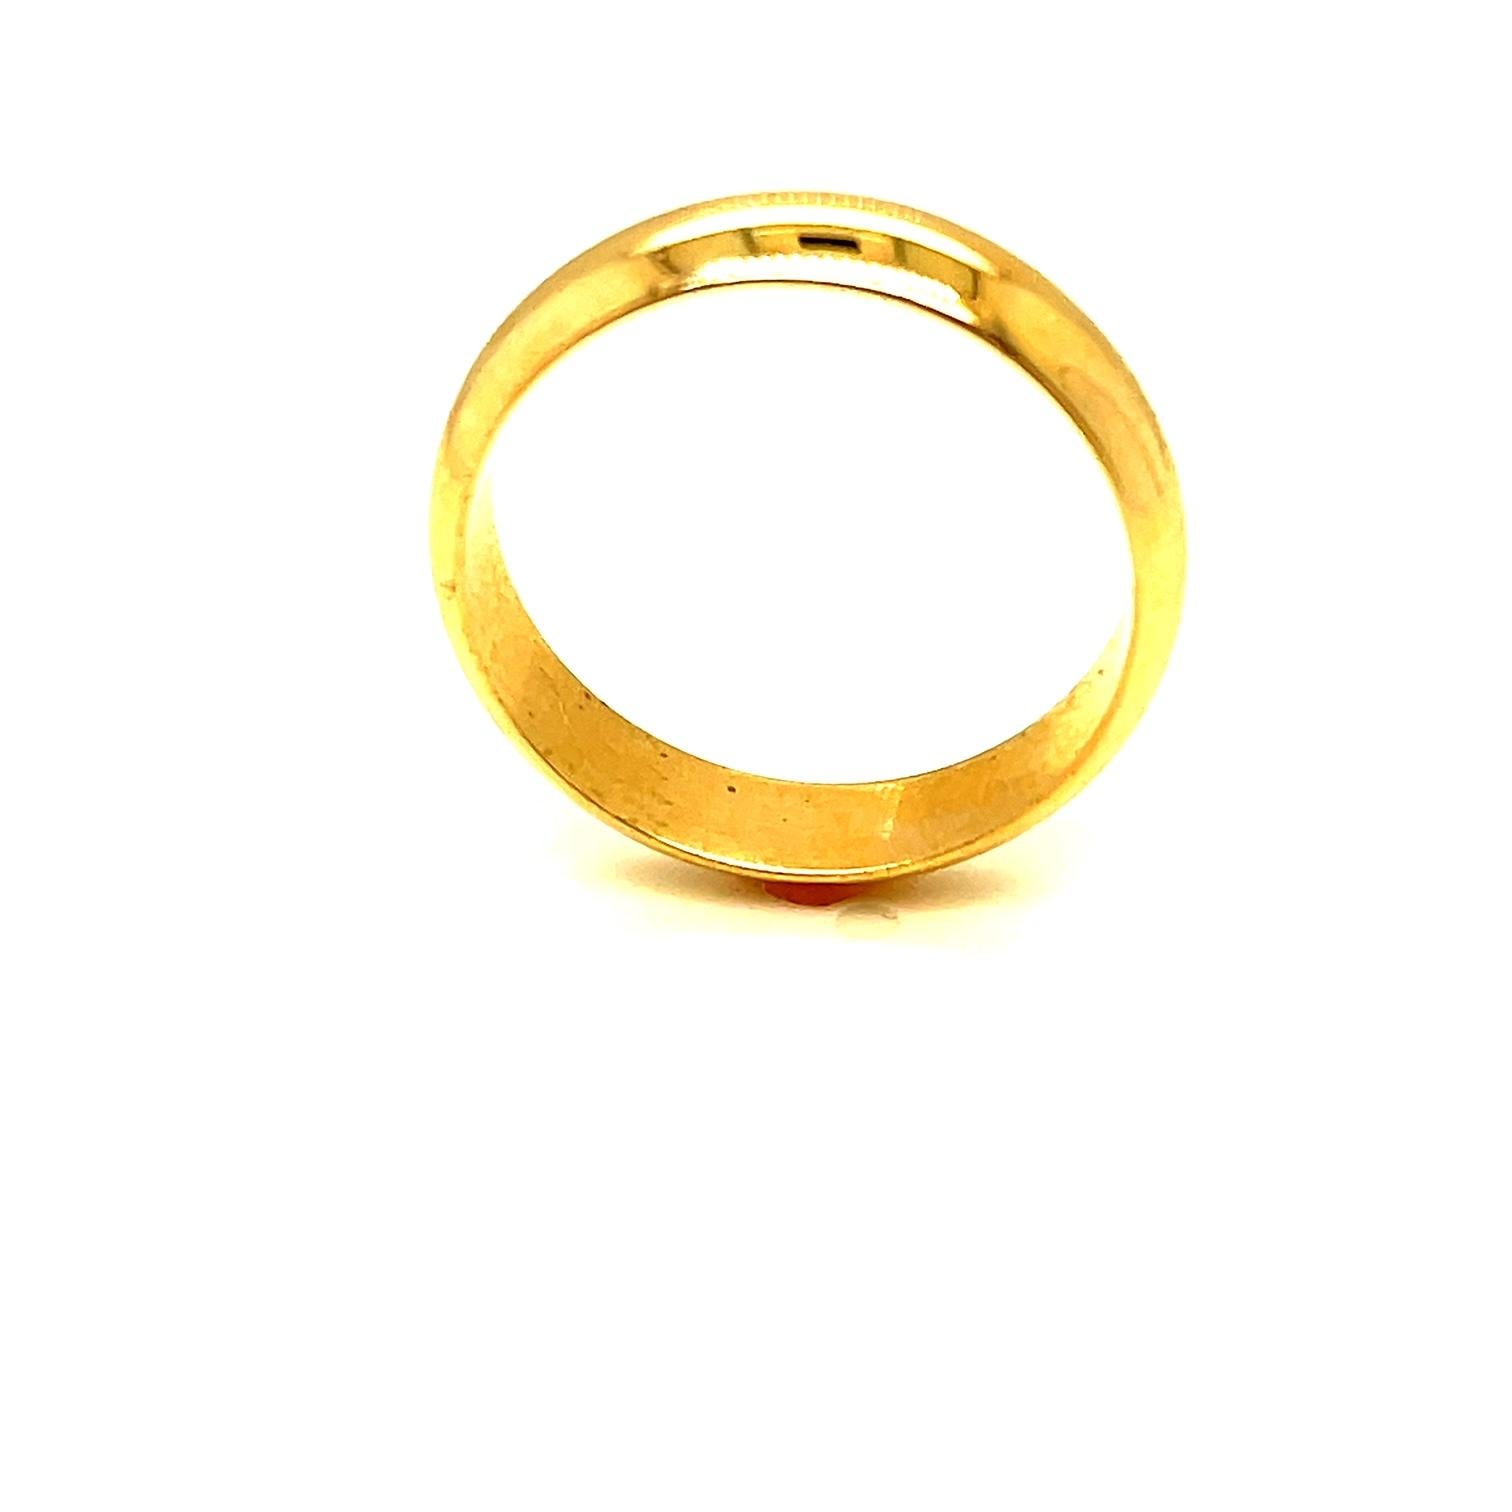 what is the average men's wedding ring size